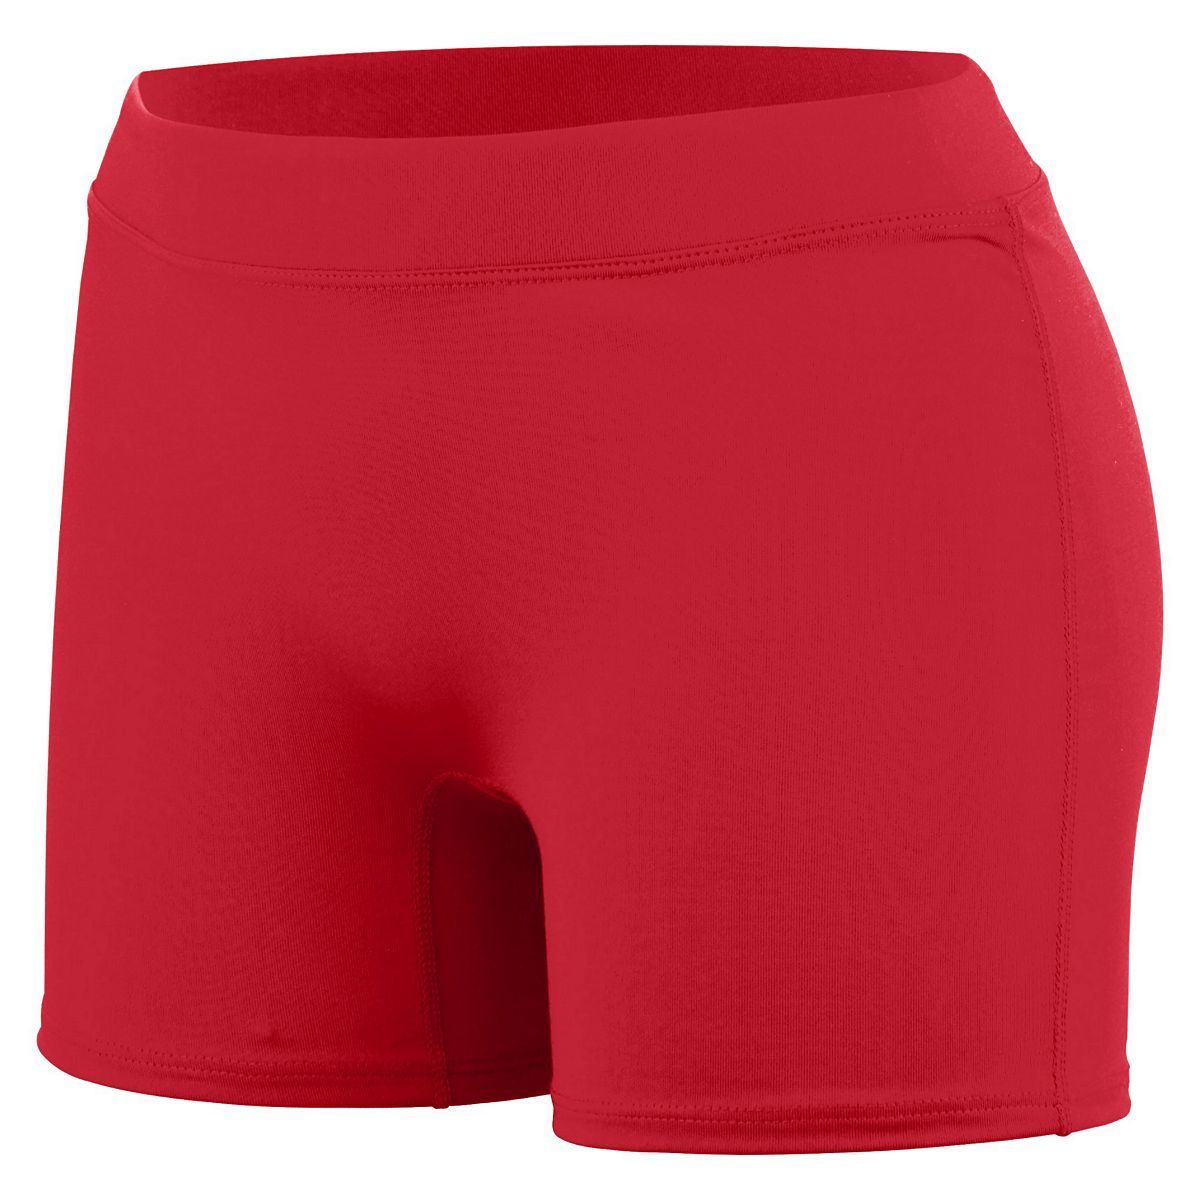 High 5 Ladies Knock Out Shorts in Scarlet  -Part of the Ladies, Ladies-Shorts, High5-Products, Volleyball product lines at KanaleyCreations.com